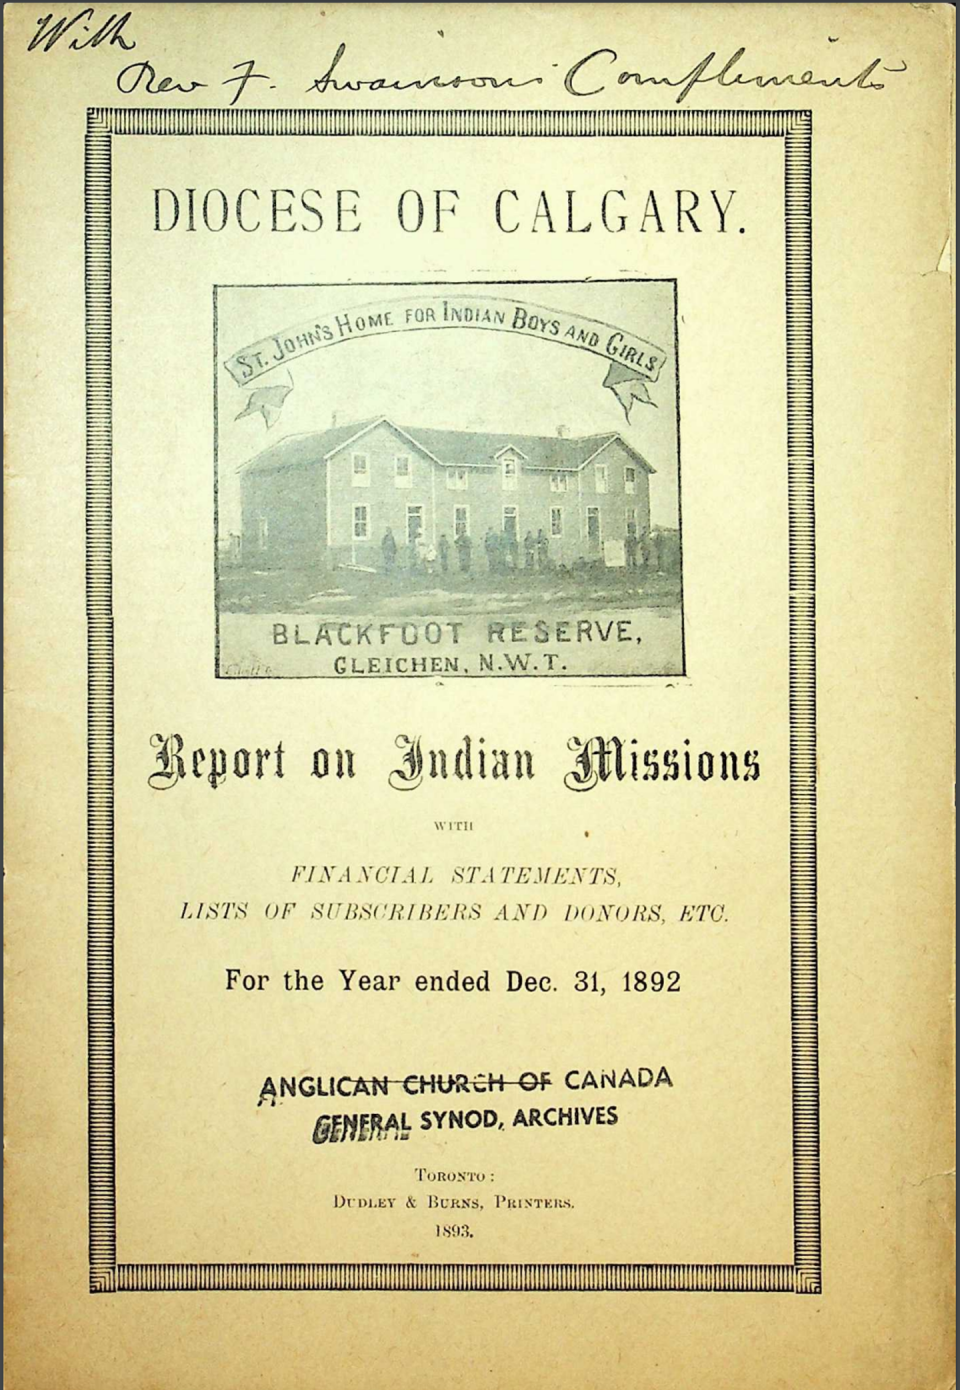 Cover of 1892 report showing a picture of a building with people in front of it that says 'St. John's Home for Indian Boys and Girls, Blackfoot Reserve' 